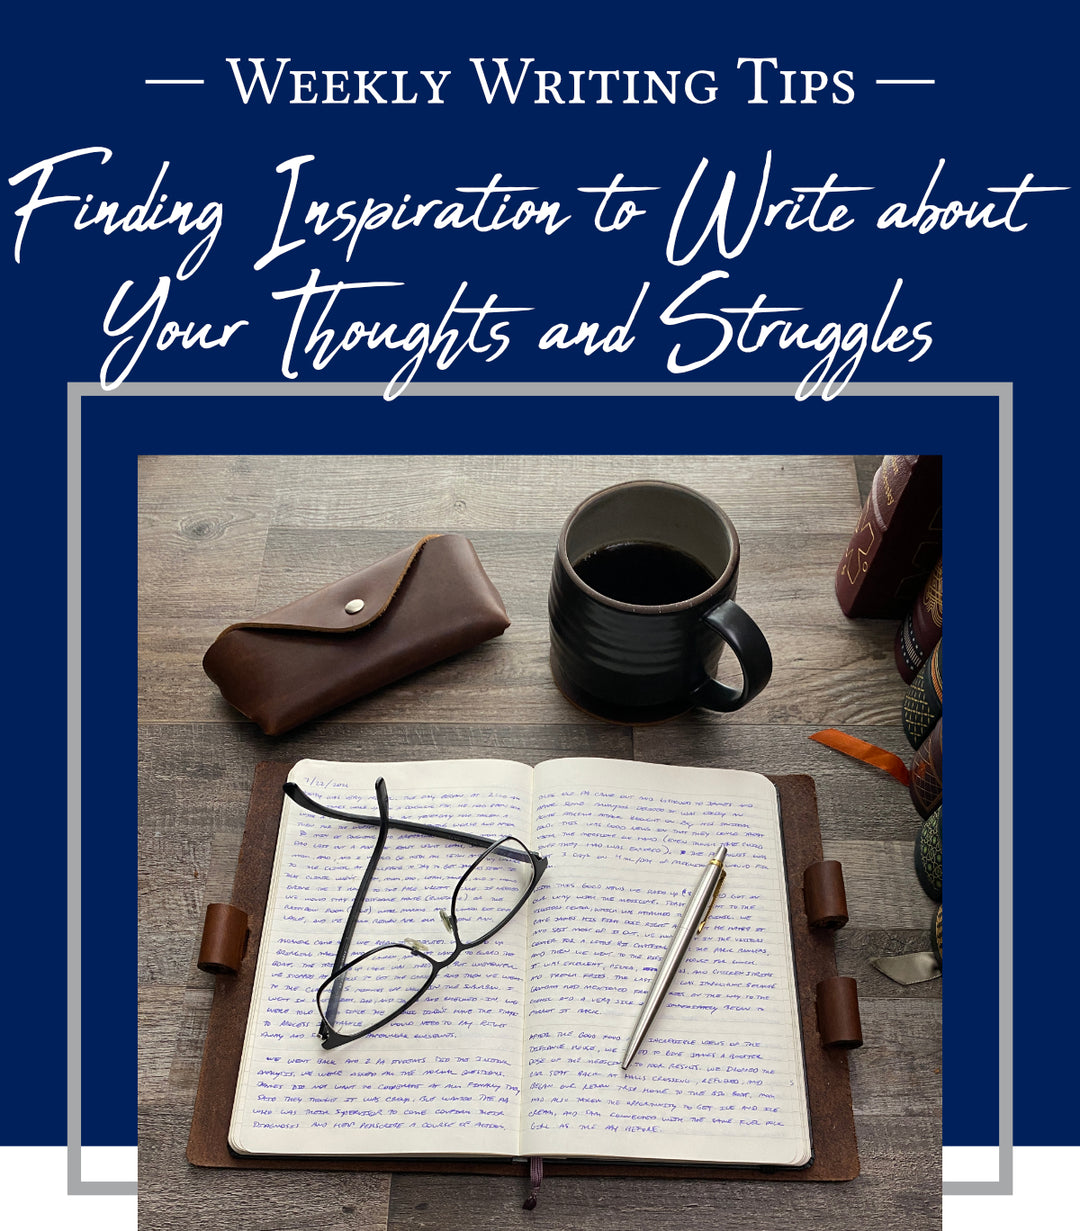 Finding Inspiration to Write about Your Thoughts and Struggles